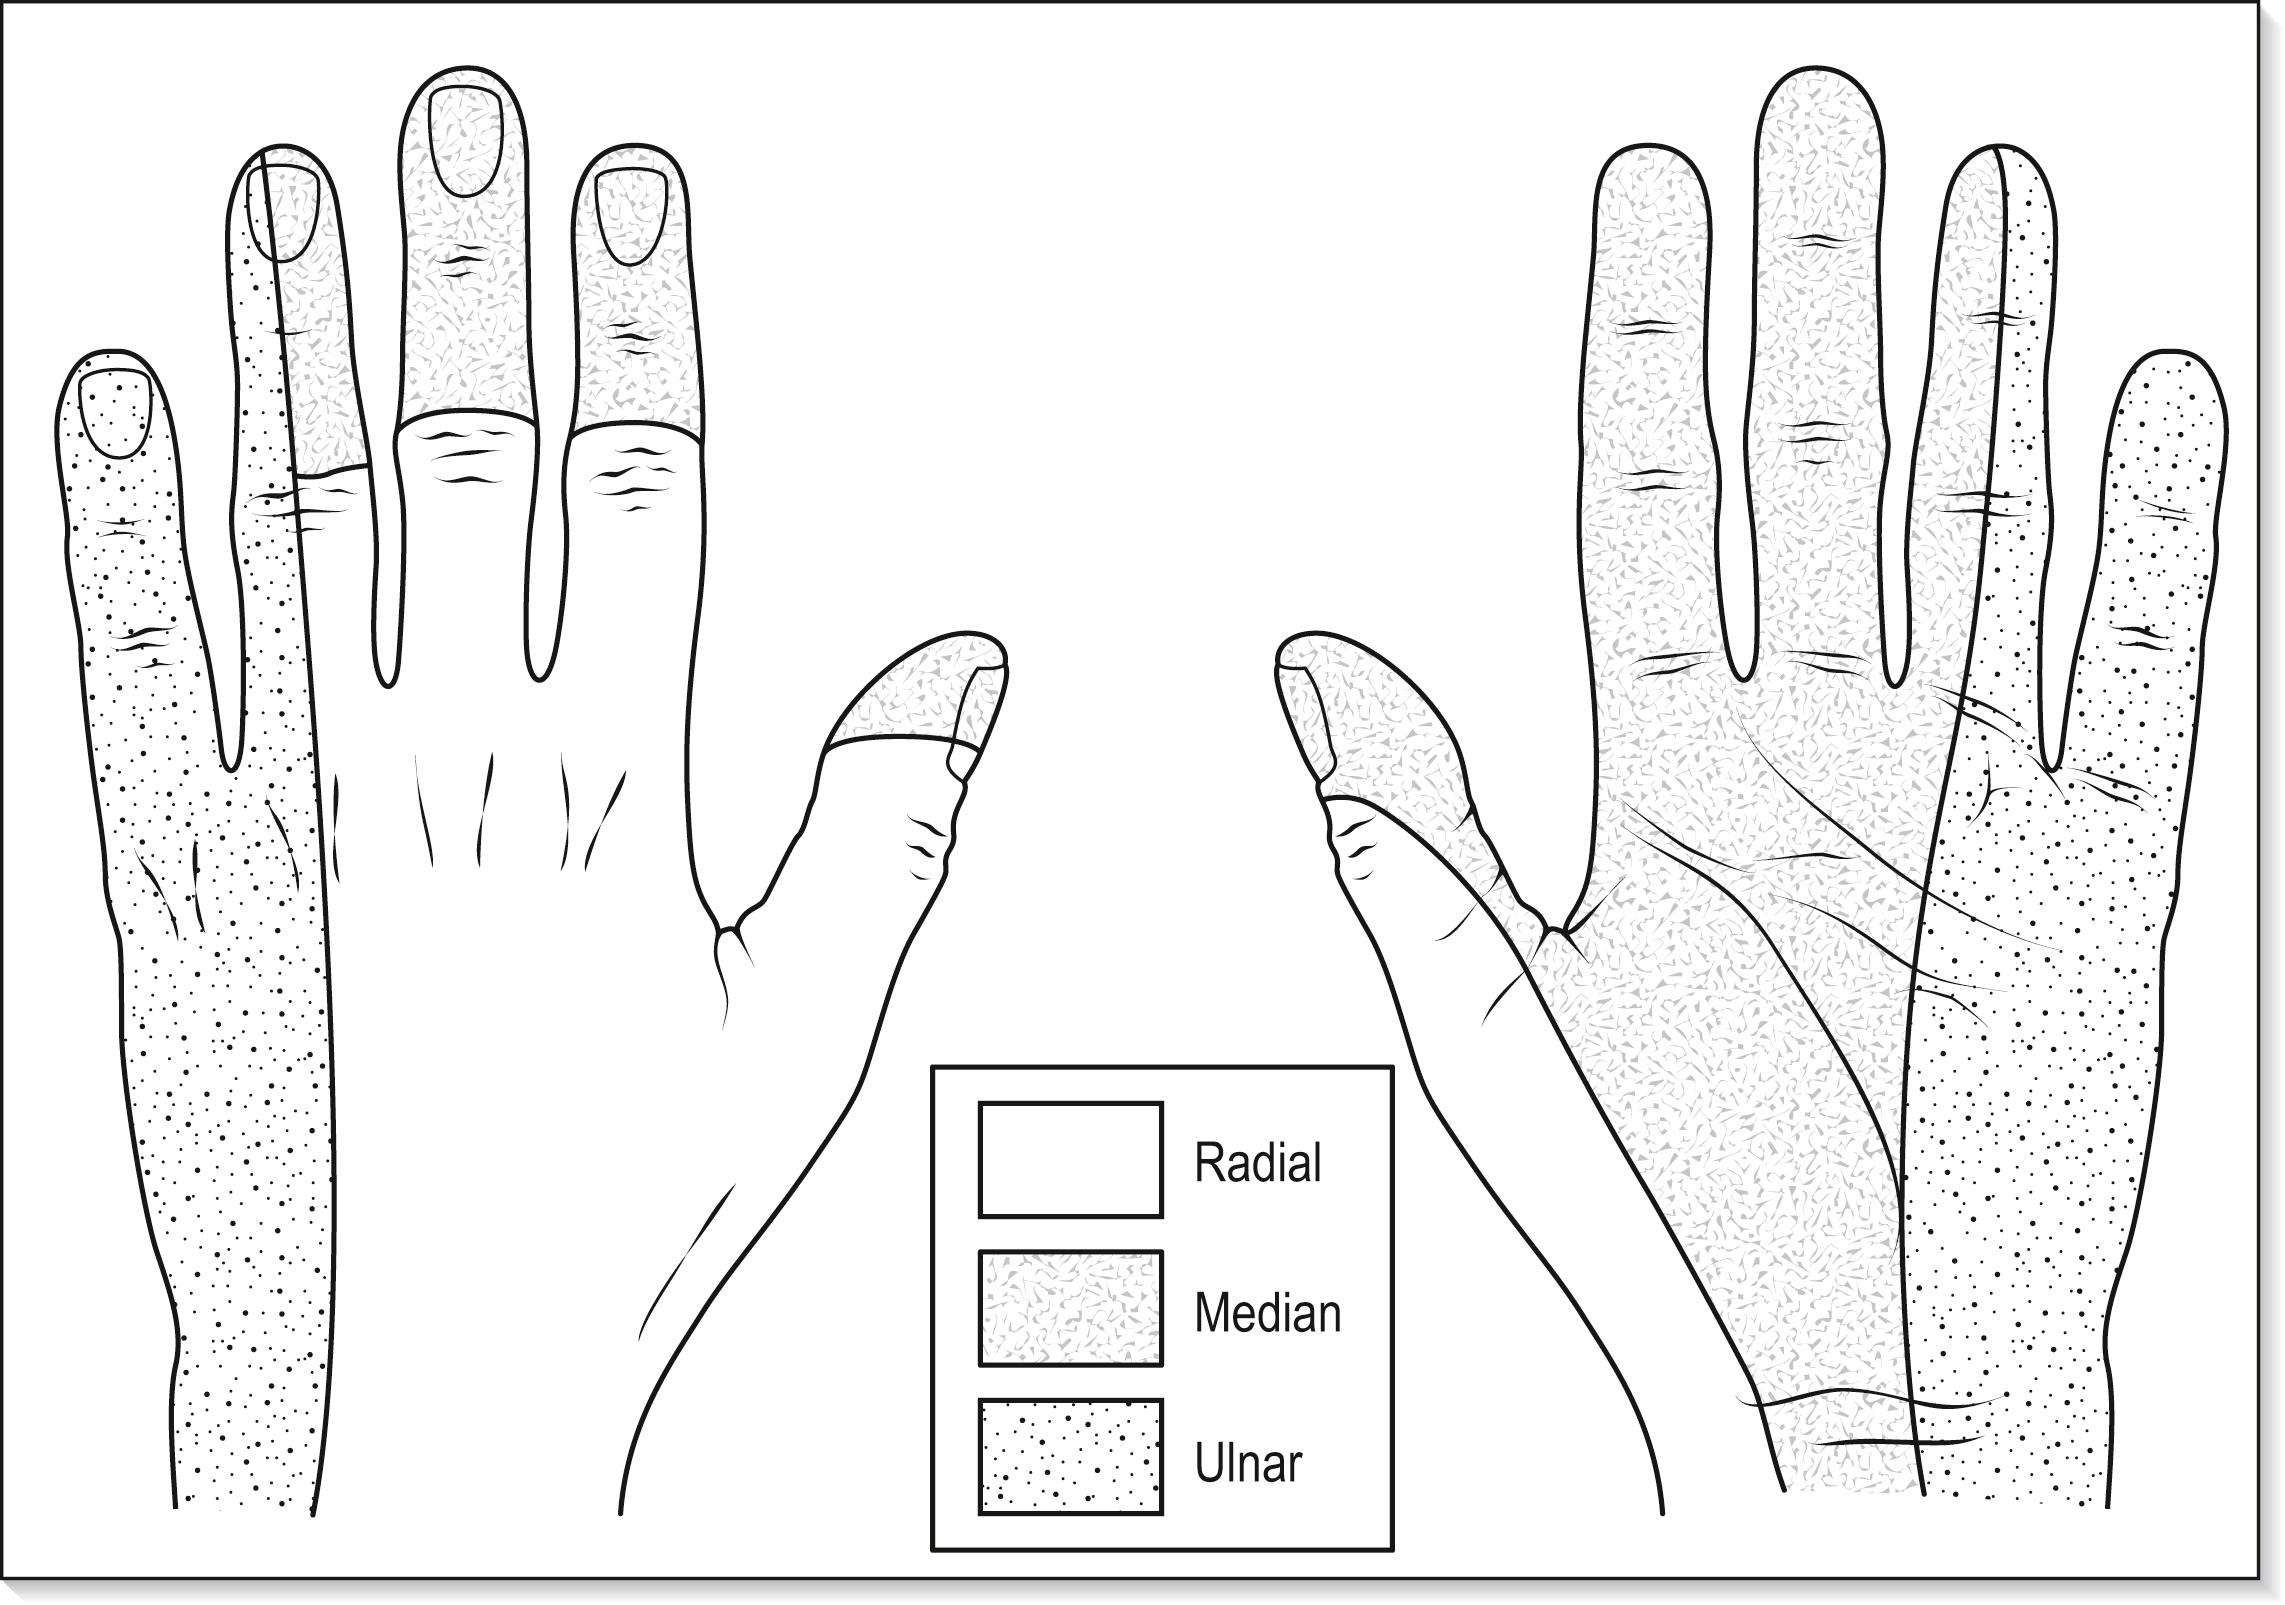 Fig. 4.5.3, The nerve supply to the hand.